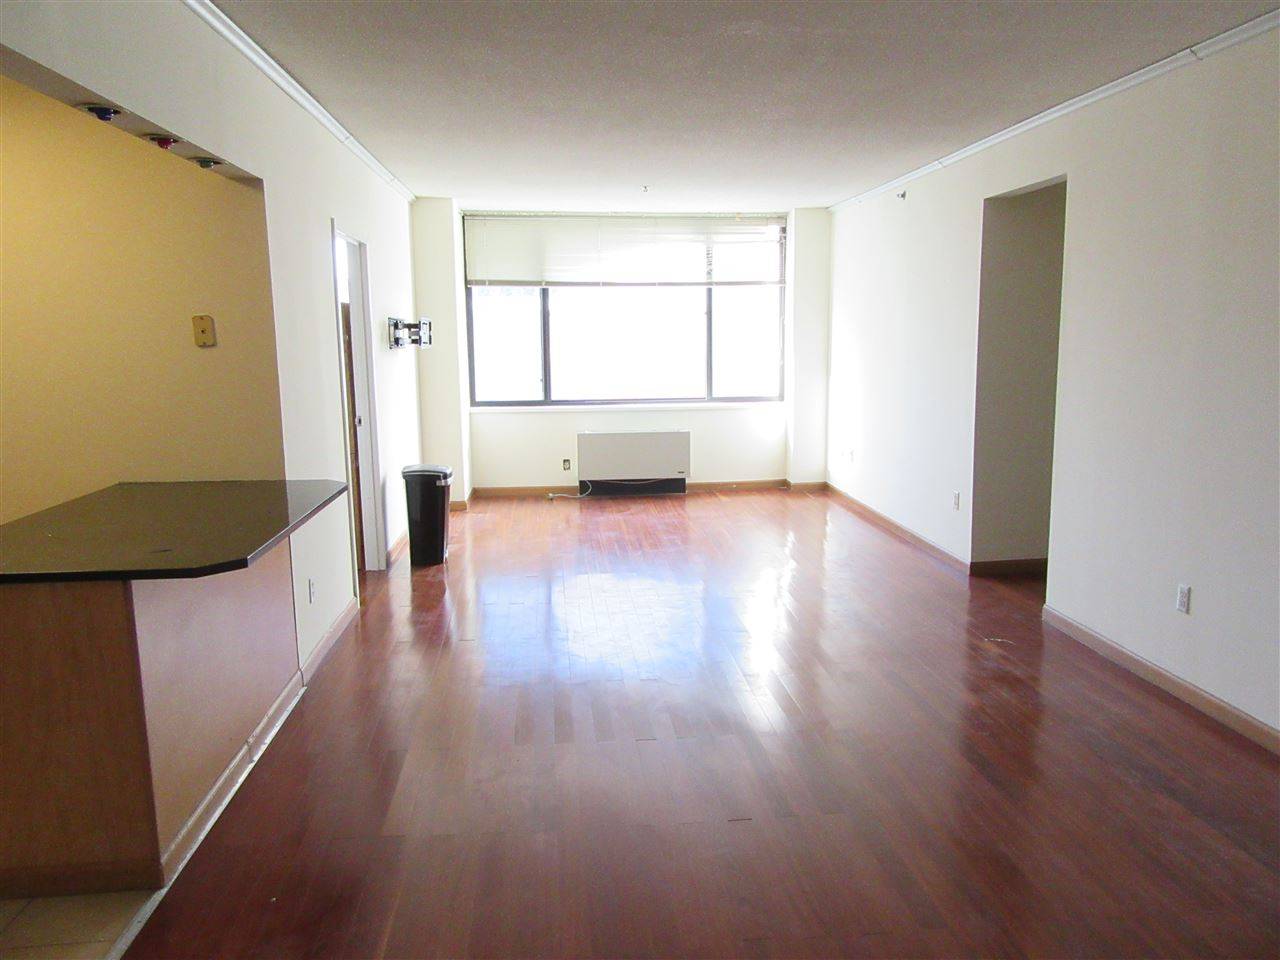 Check out this large renovated 3 bed 2 bath unit at James Monroe